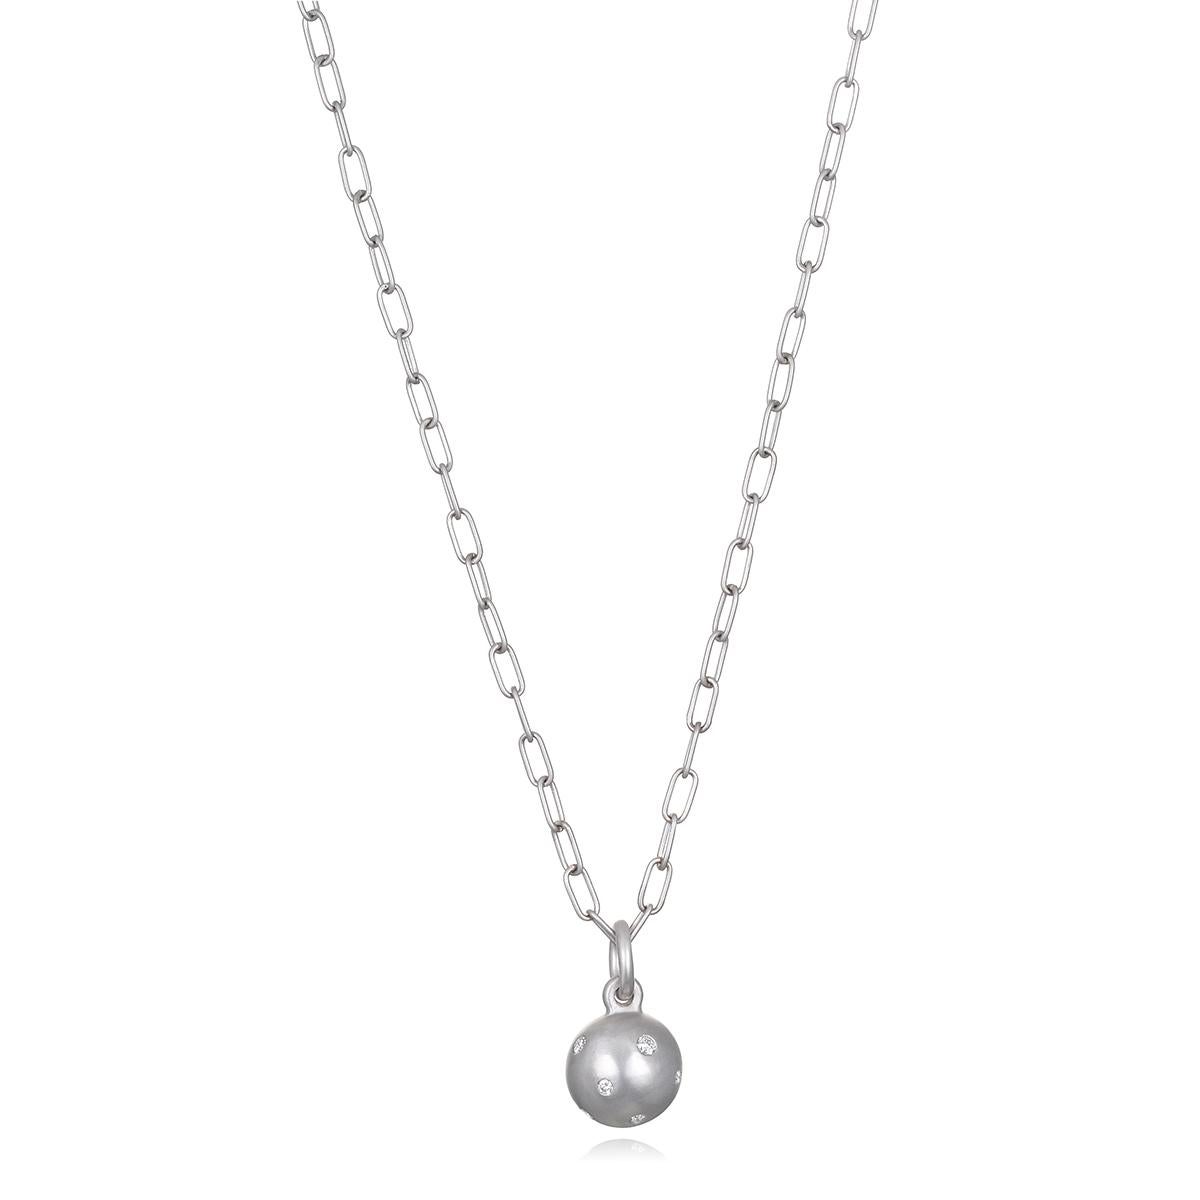 Faye Kim's Platinum Burnished Diamond Ball Charm, with its solid platinum construction and diamond-studded surface, offers the perfect weight and just the right amount of shine and sparkle. Worn alone or layered with other necklaces and charms, this